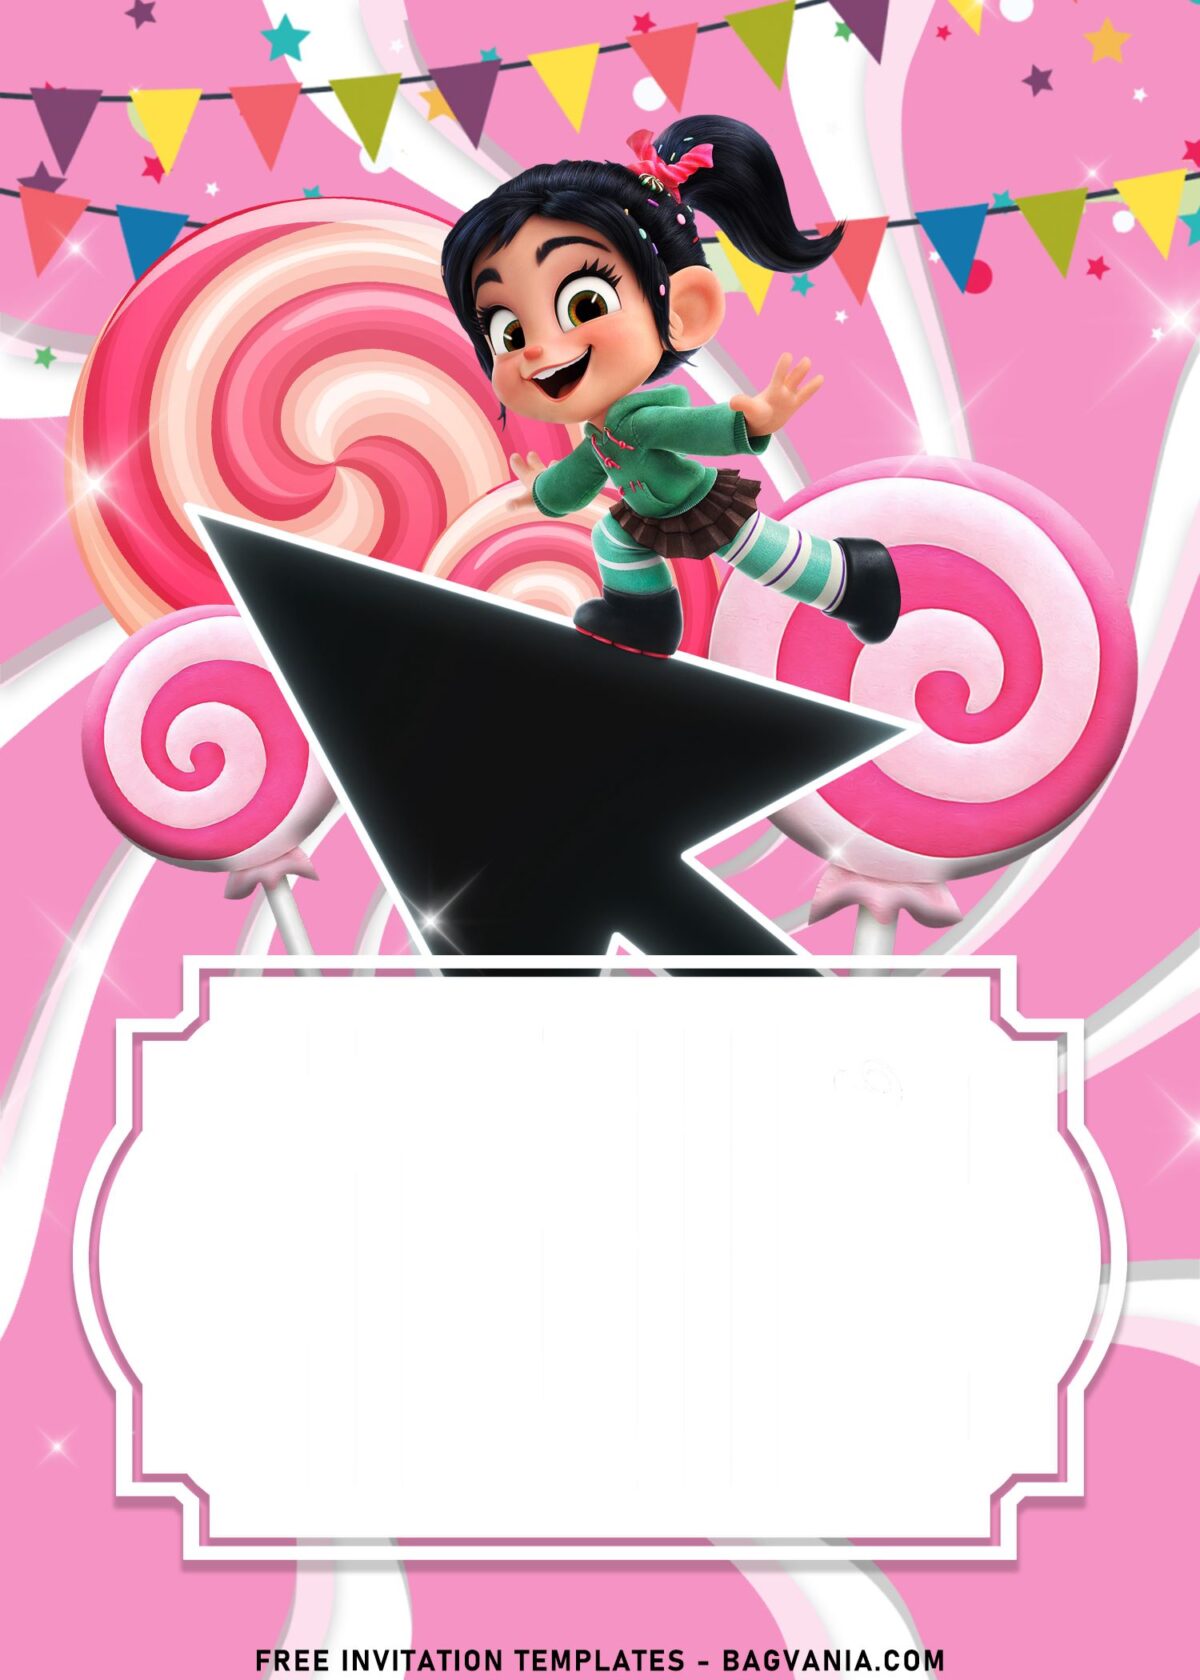 9+ Girly Vanellope Birthday Invitation Templates Great For All Ages with Vanellope from Ralph Break The Internet